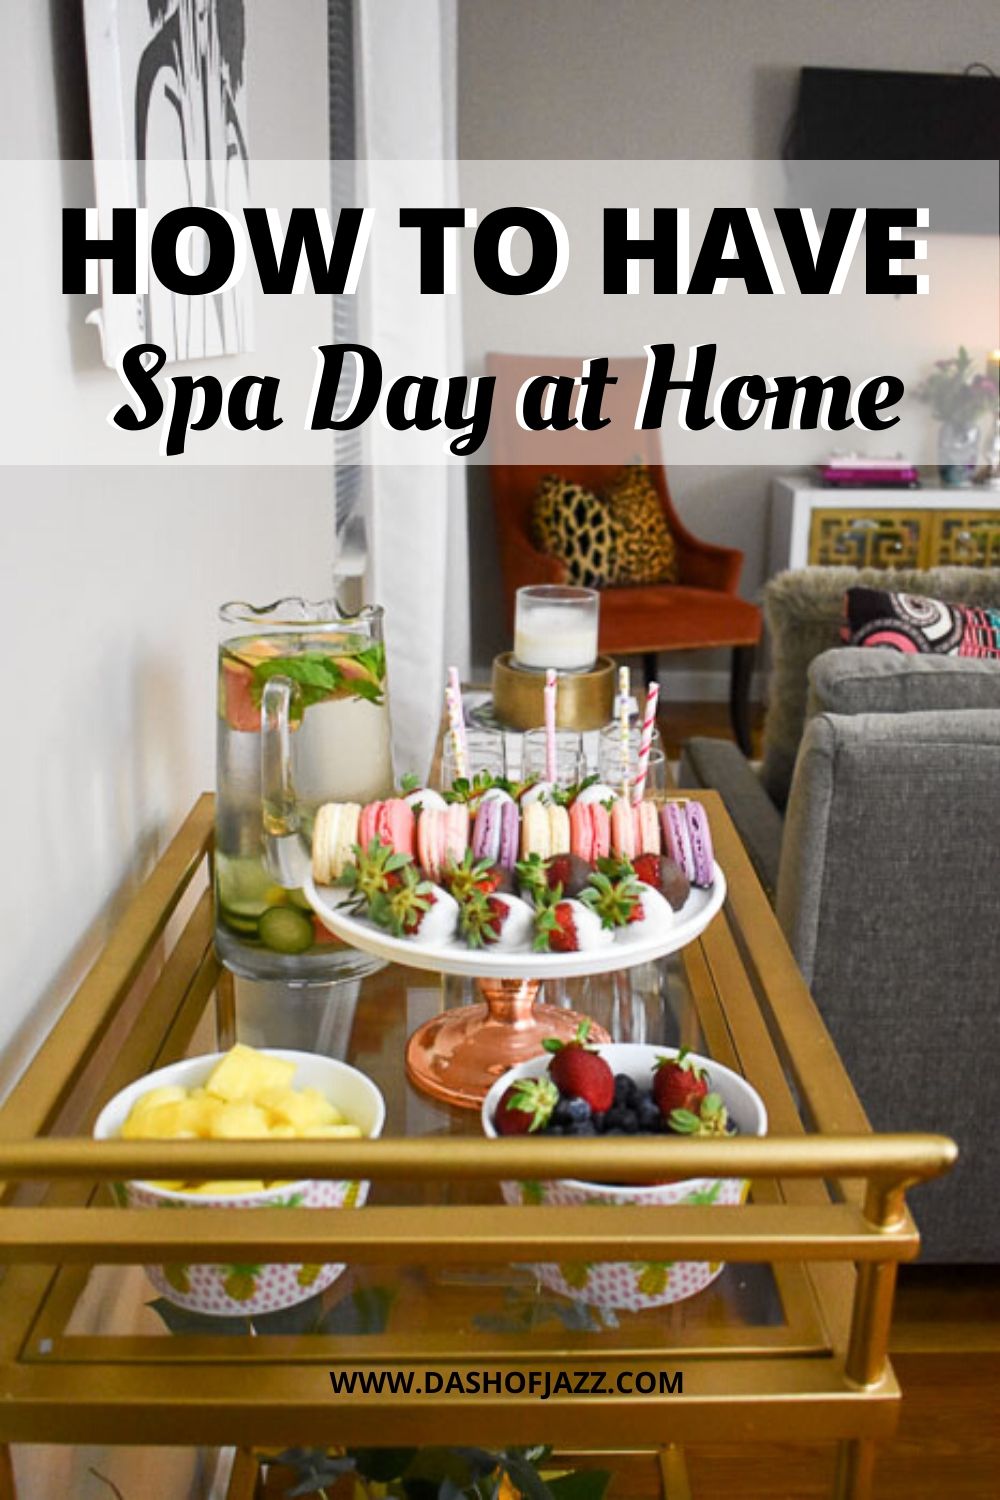 bar cart with fresh fruit and pastries on it and text overlay "how to have spa day at home"